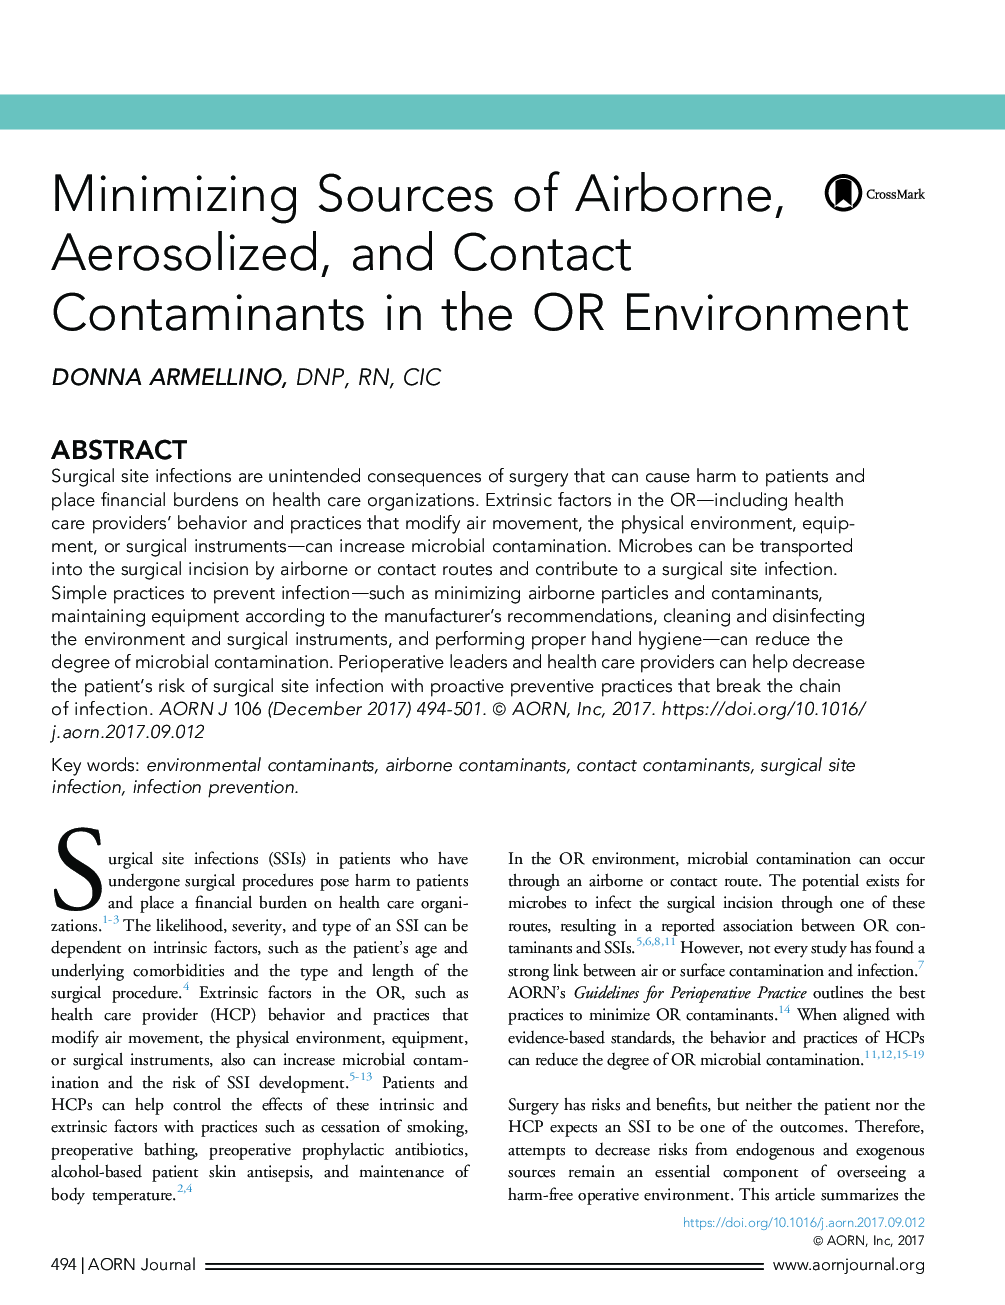 Minimizing Sources of Airborne, Aerosolized, and Contact Contaminants in the OR Environment